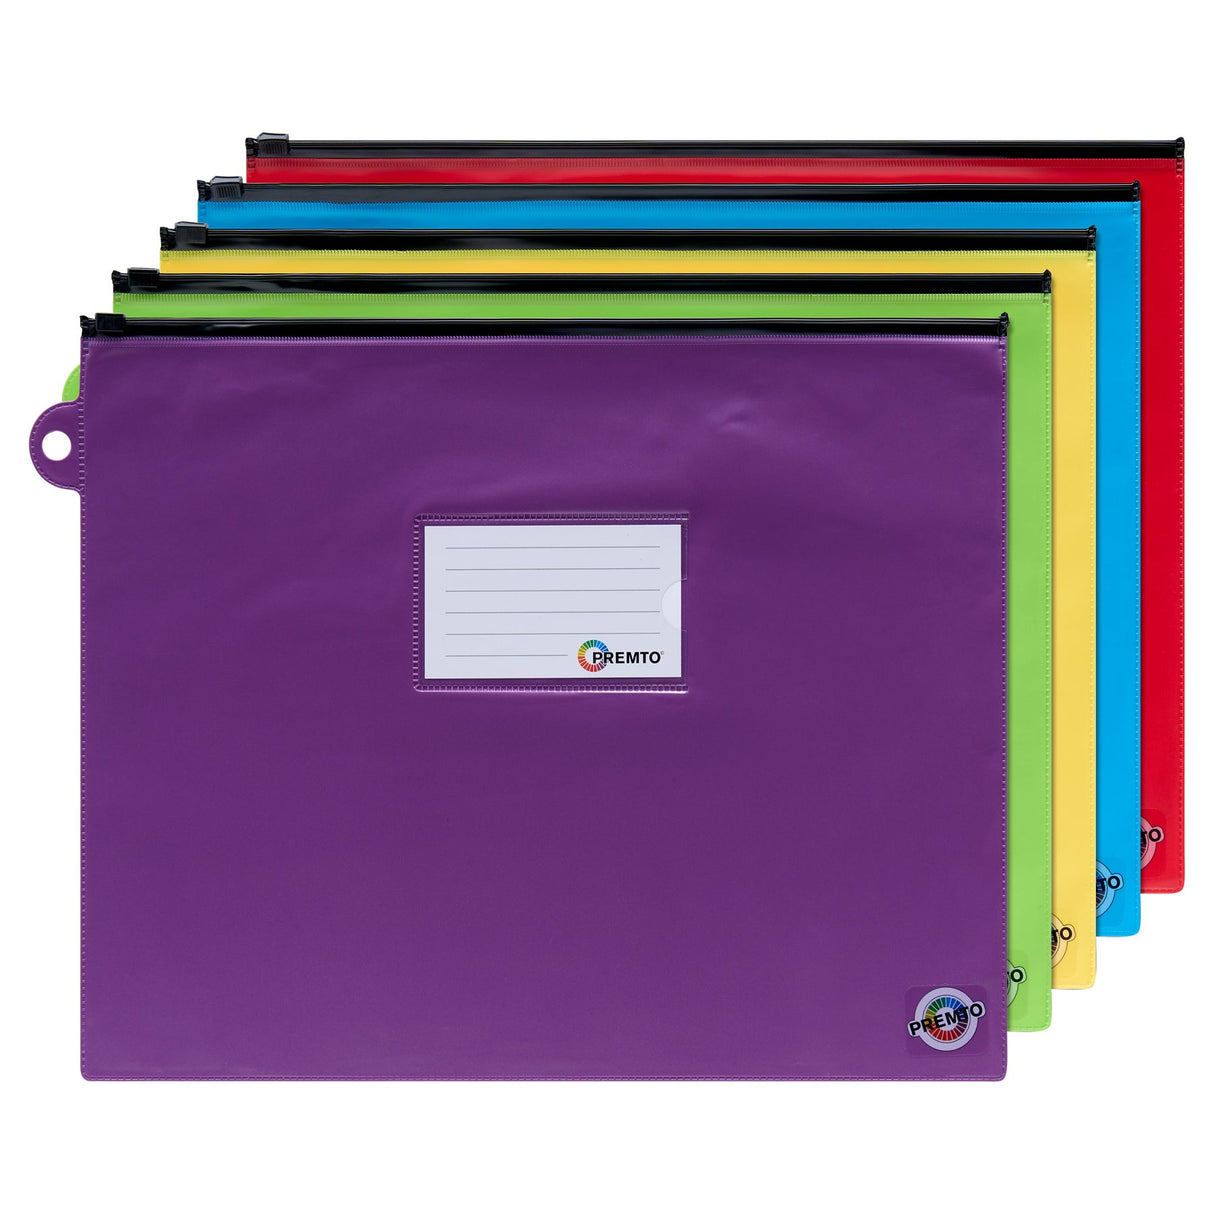 Premto Multipack| Extra Durable Storage Pvc Wallet - A4+ Pack of 5 | Stationery Shop UK